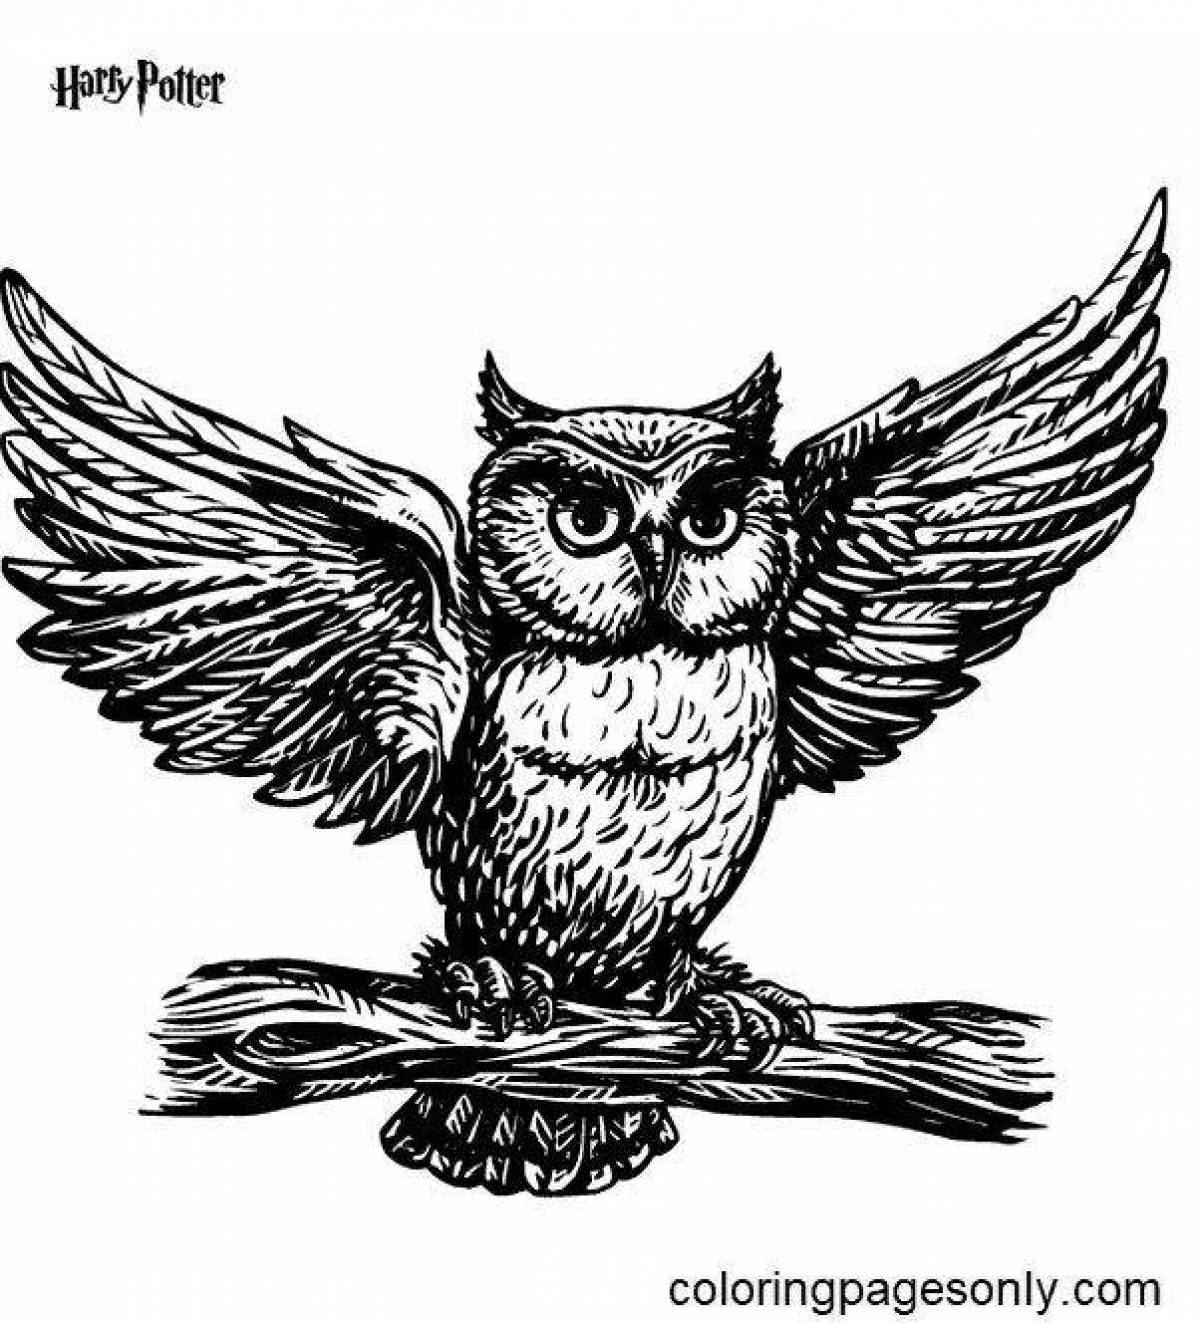 Harry Potter Owl Glitter Coloring Page